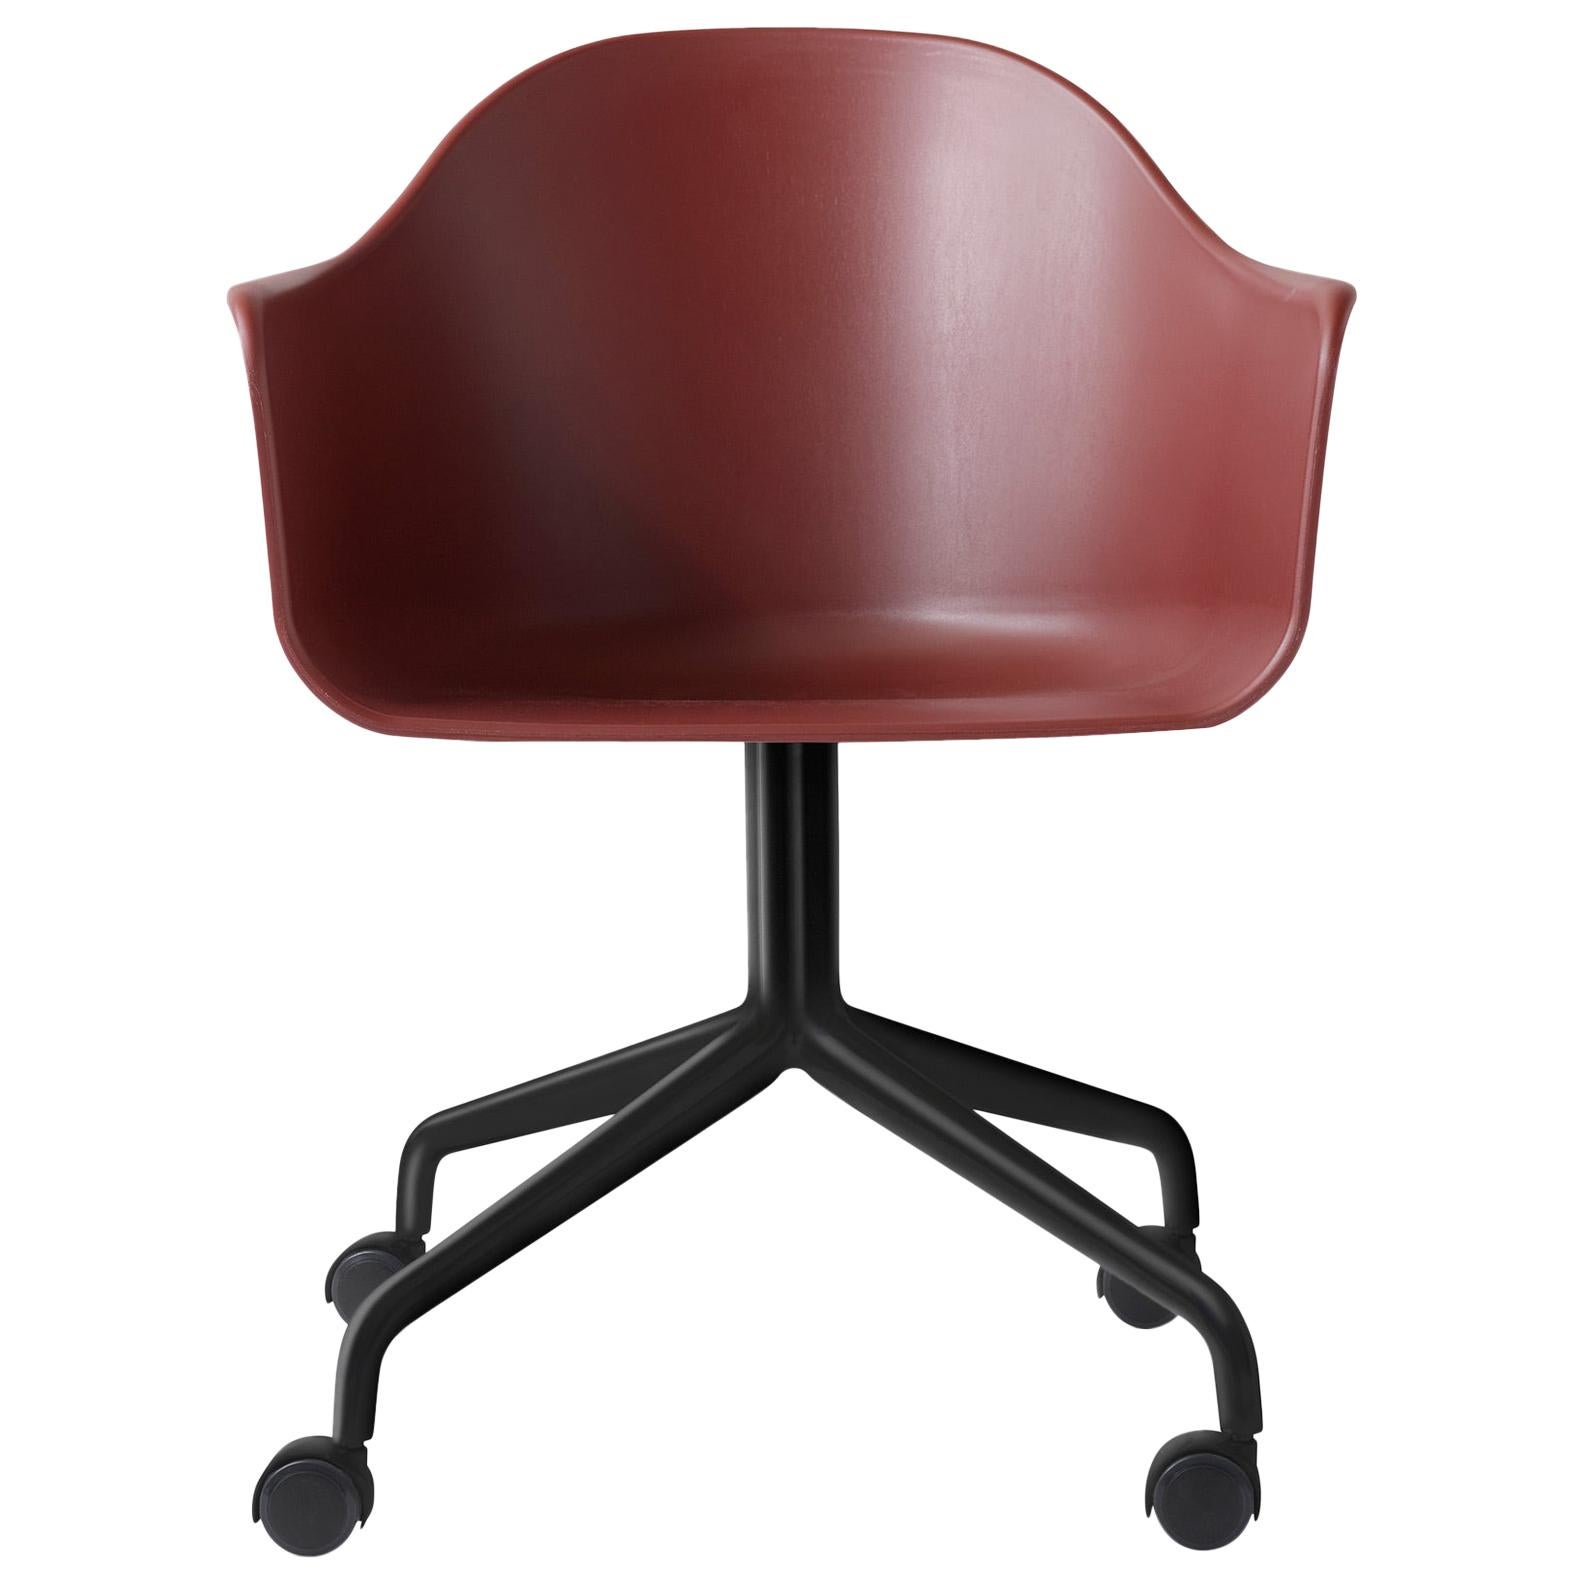 Harbour Side Chair, Black Steel Swivel Base with Caster, Burning Red Shell For Sale